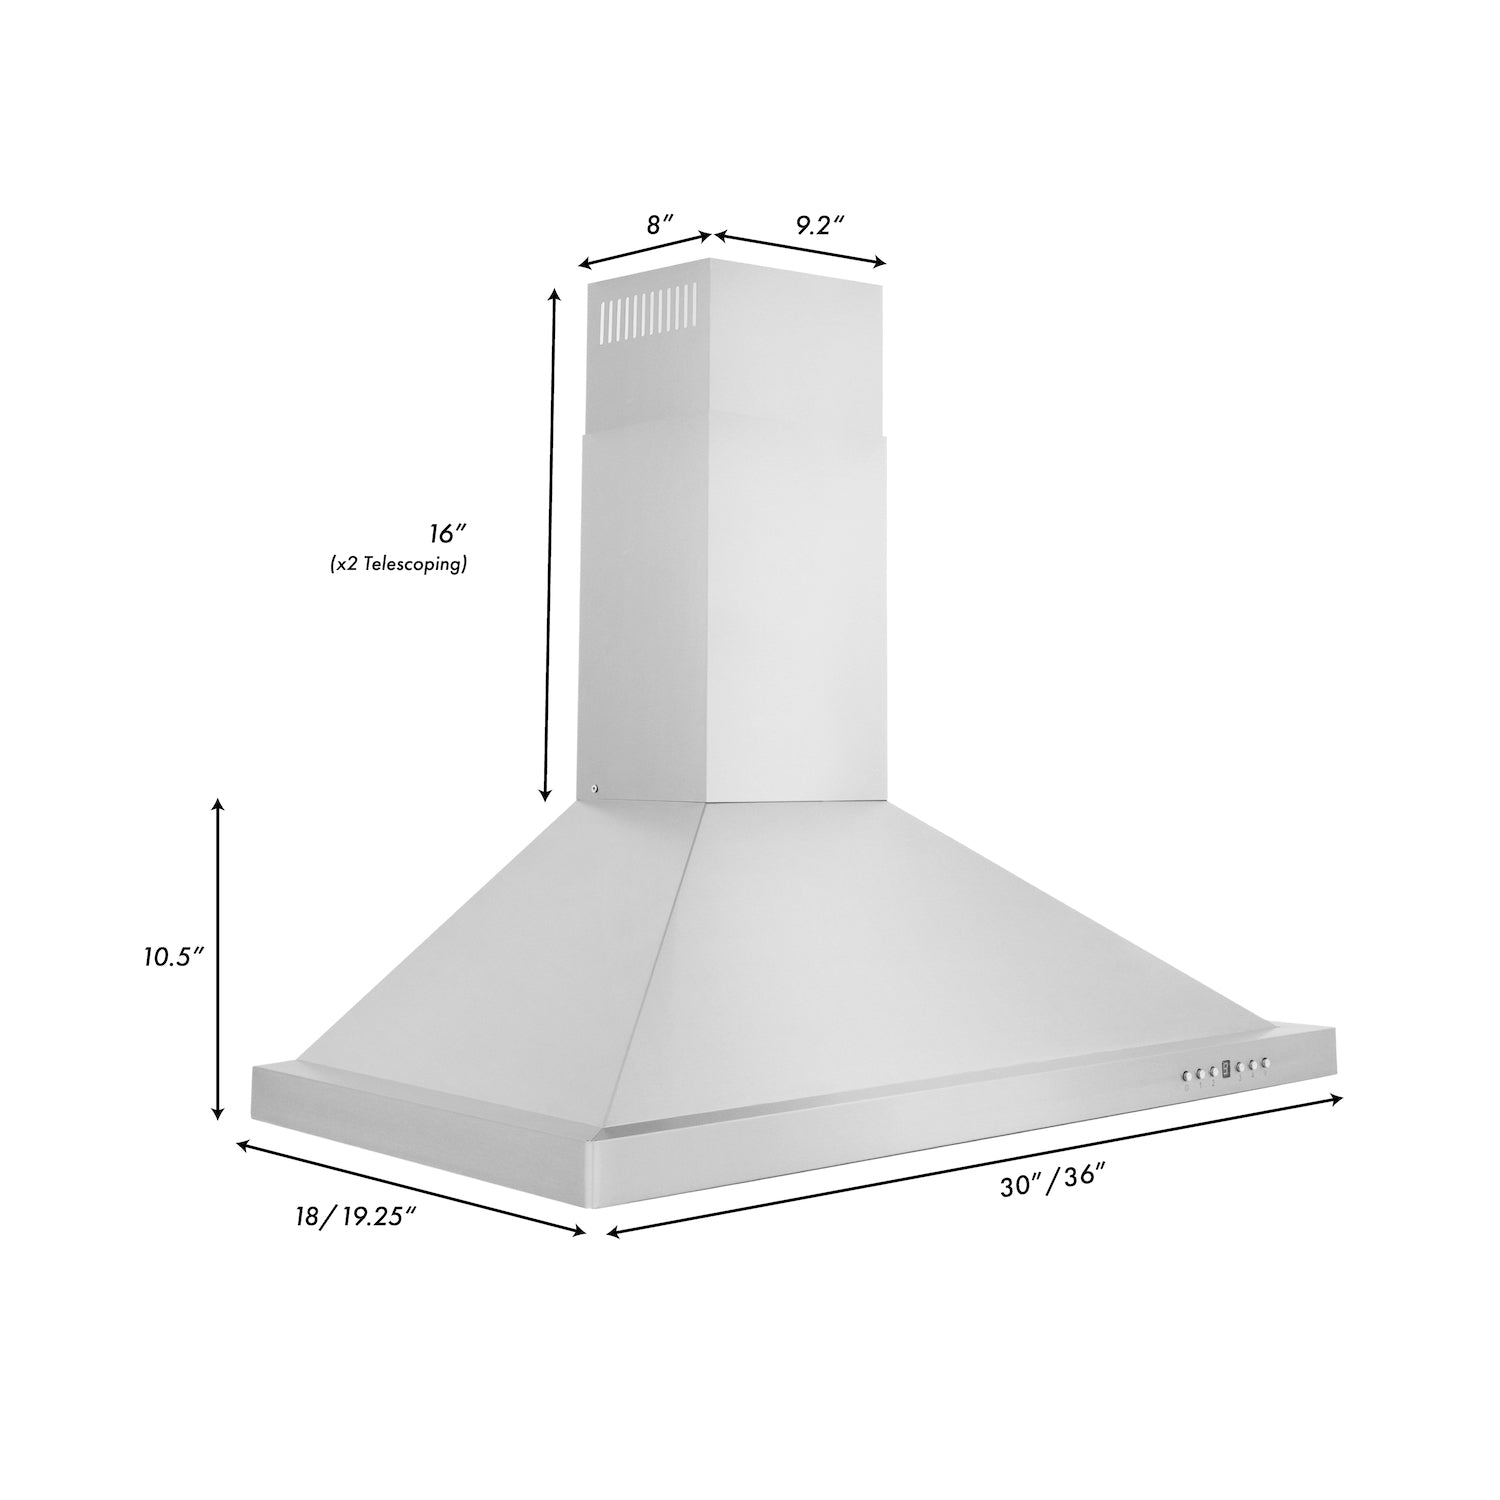 ZLINE 30-inch and 36-inch Convertible Vent Wall Mount Range Hood in Stainless Steel Dimensions (KB-30-36)